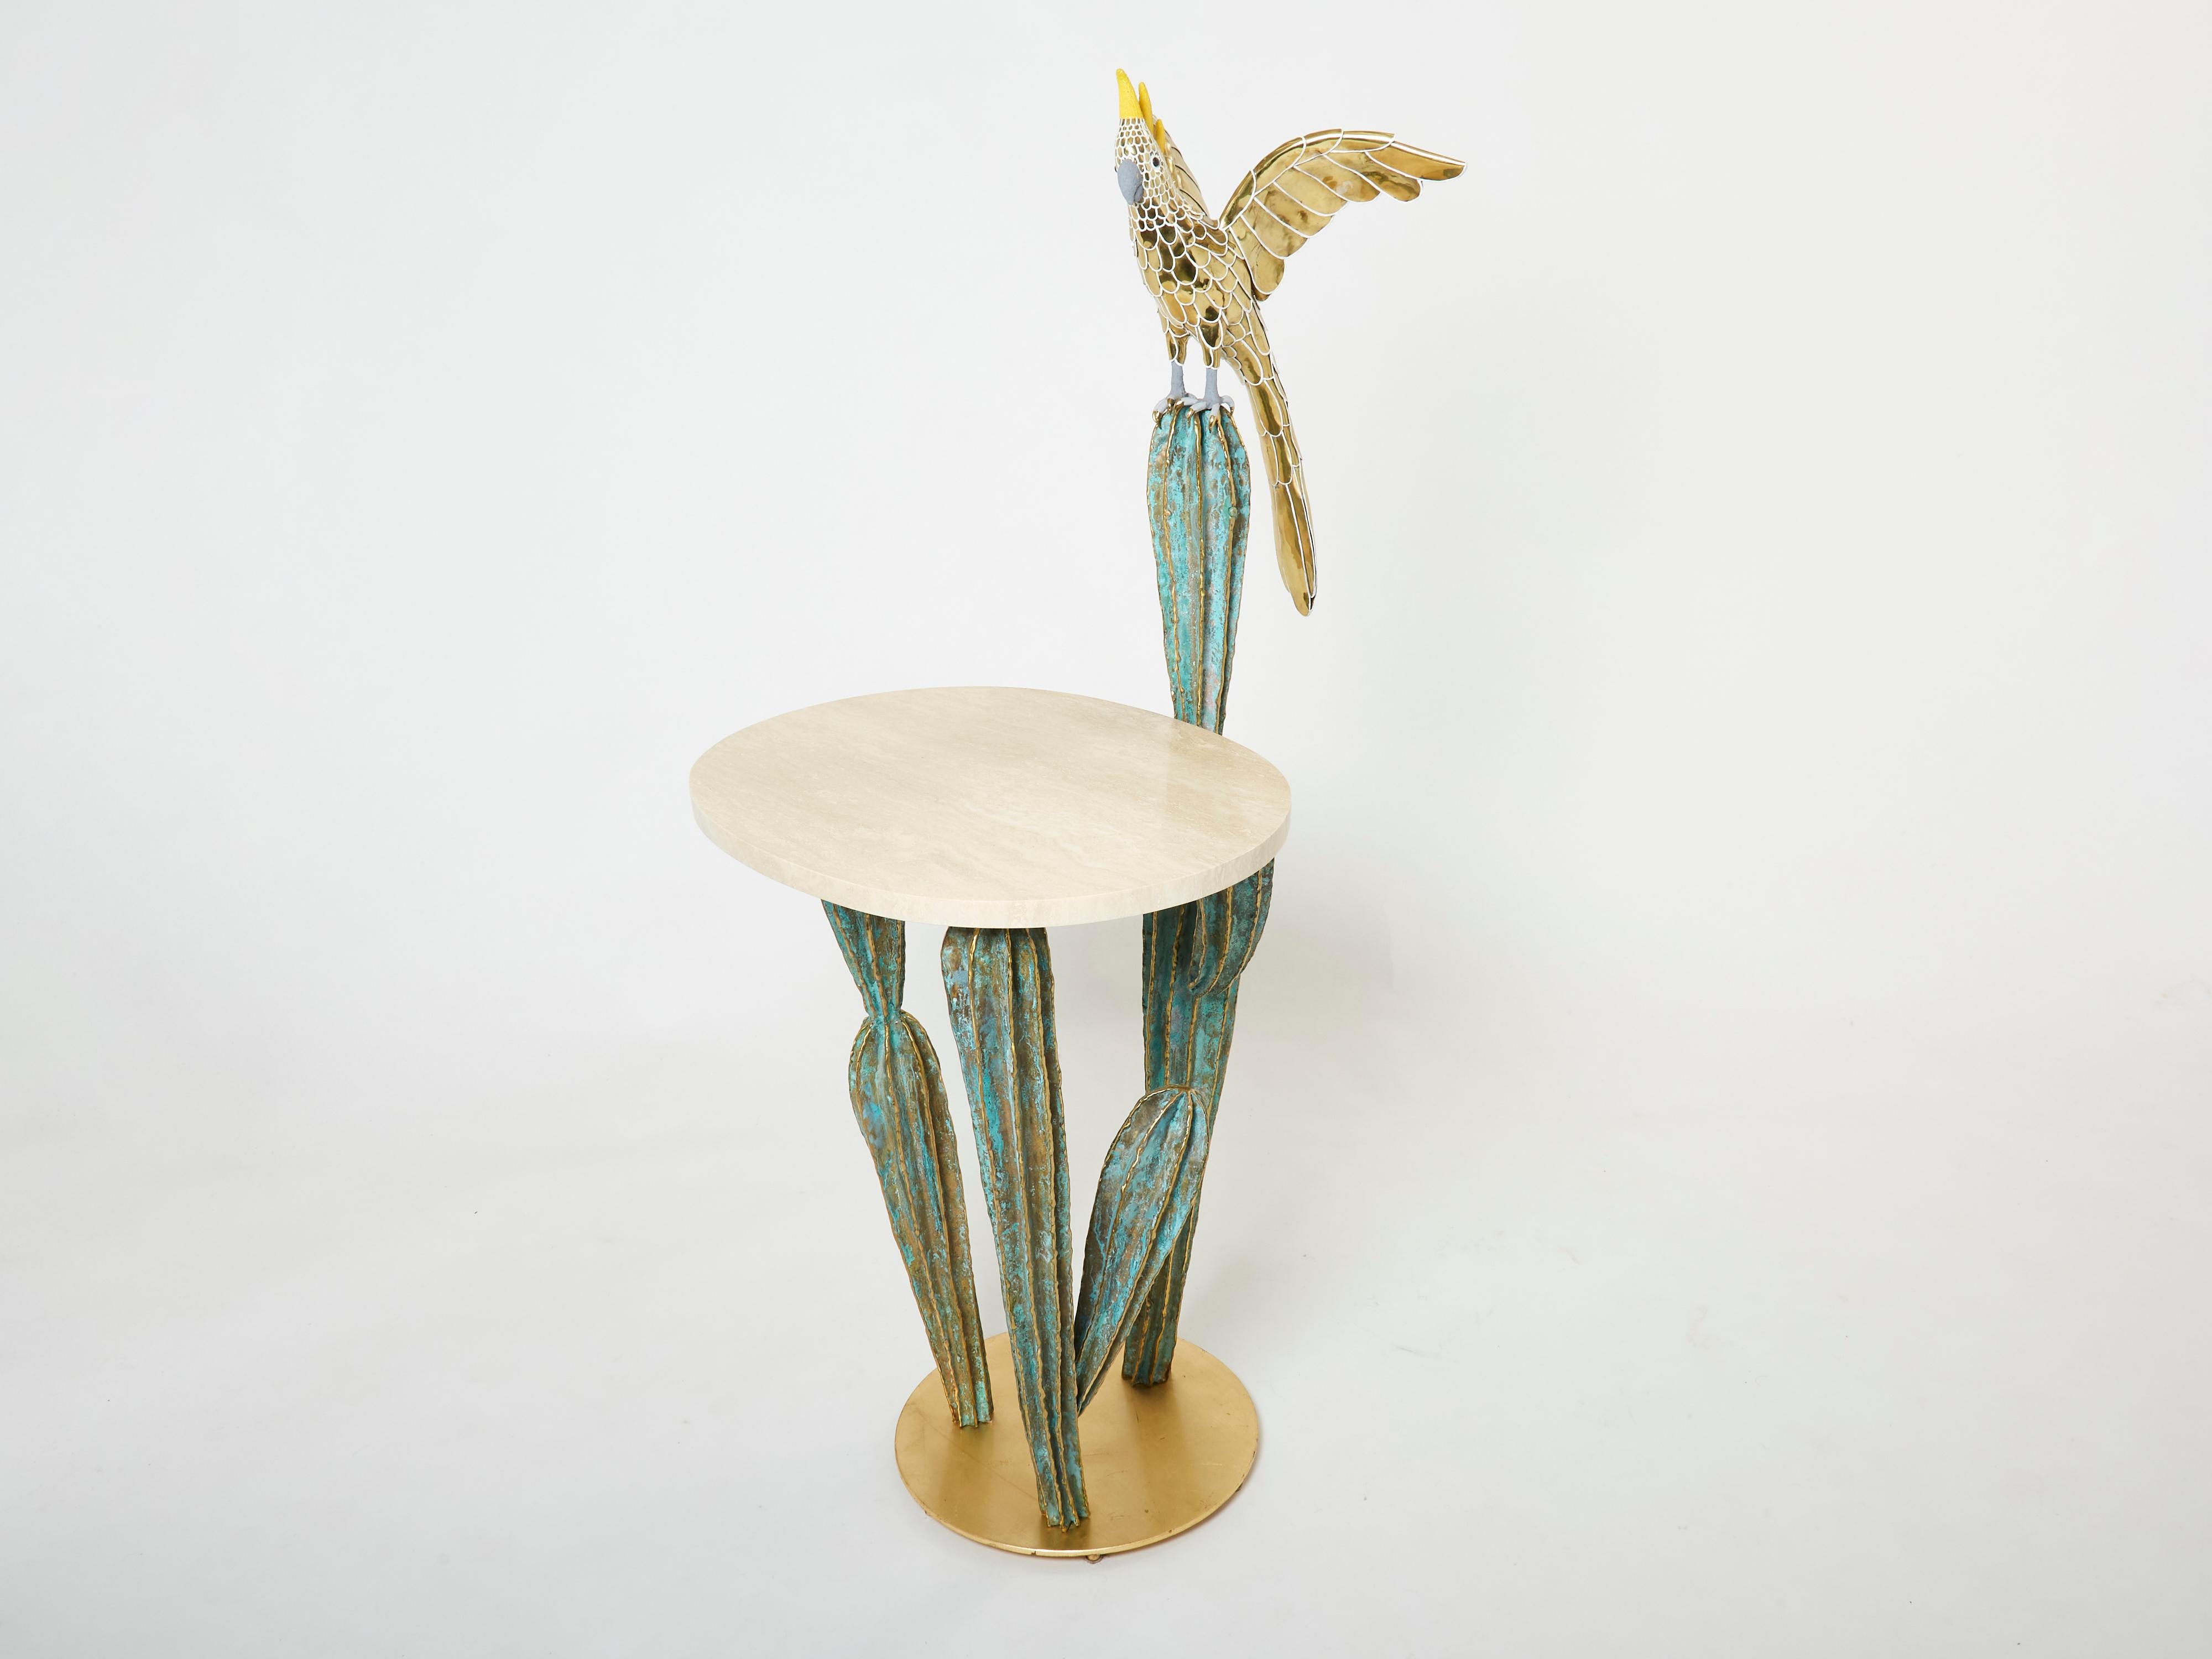 French Unique Signed Alain Chervet Brass Cactus and Parrot Console Table 1989 For Sale